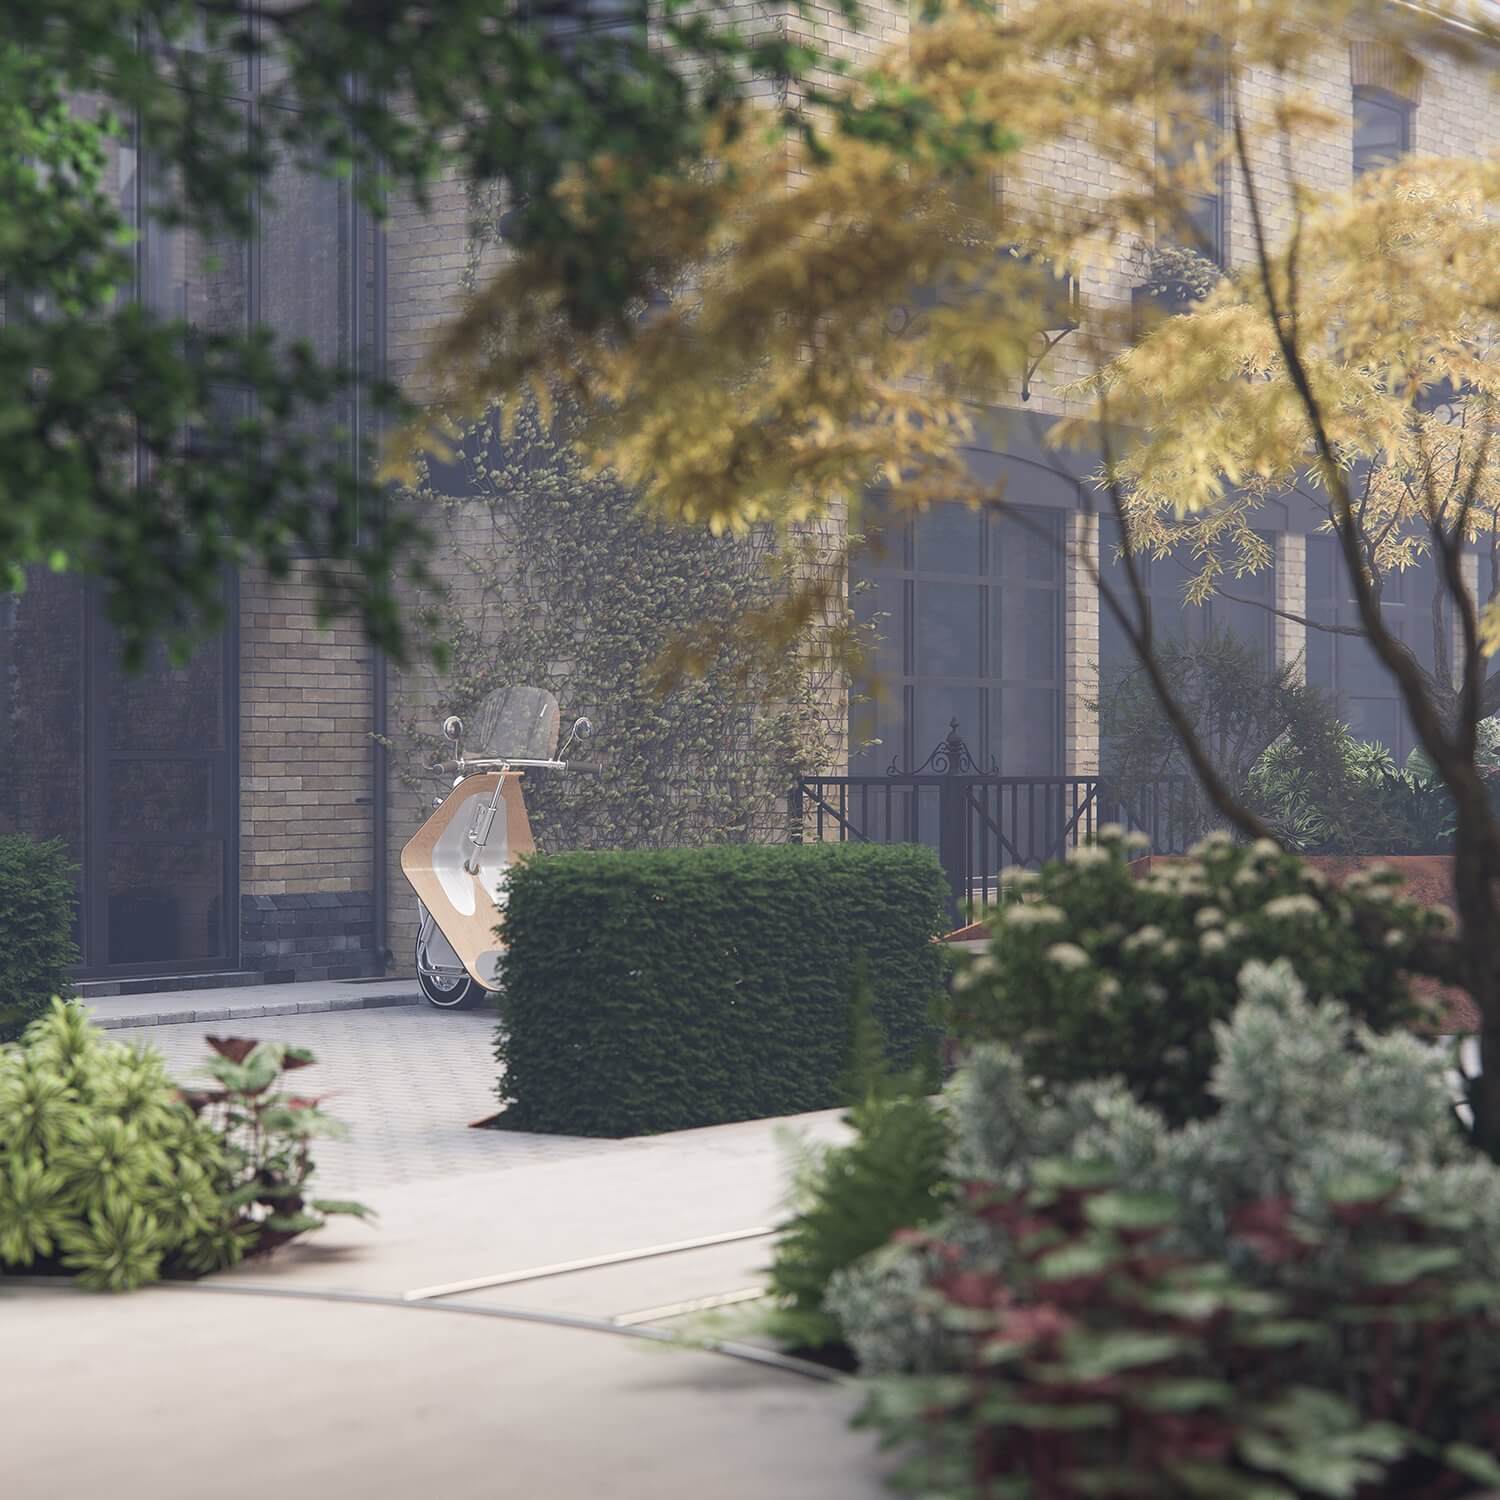 7 Old Town Clapham Apartment courtyard plants - cgi visualization